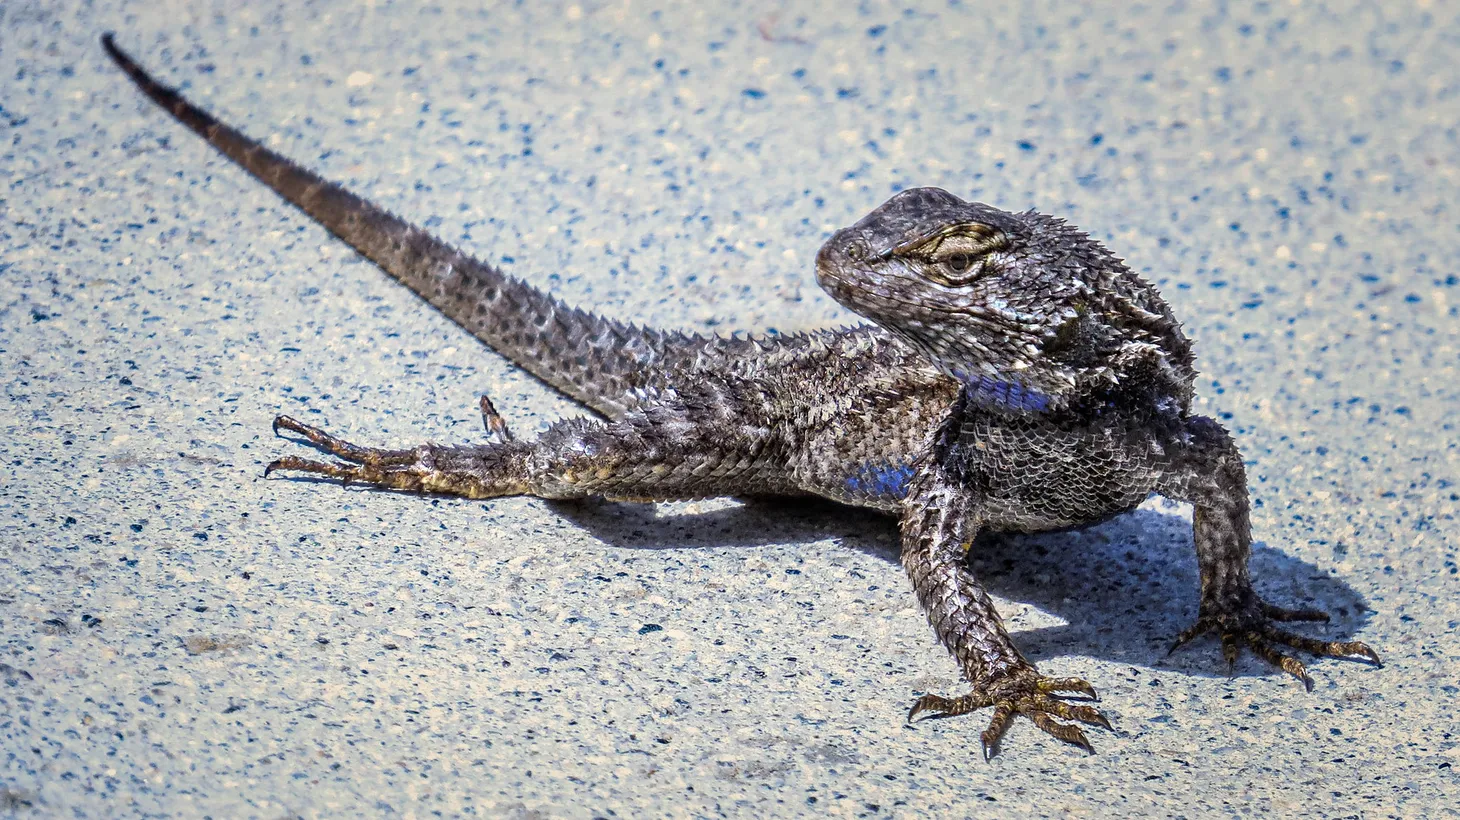 “This year, the most commonly observed species was the western fence lizard,” says Lila Higgins, who works at the Natural History Museum of Los Angeles County.